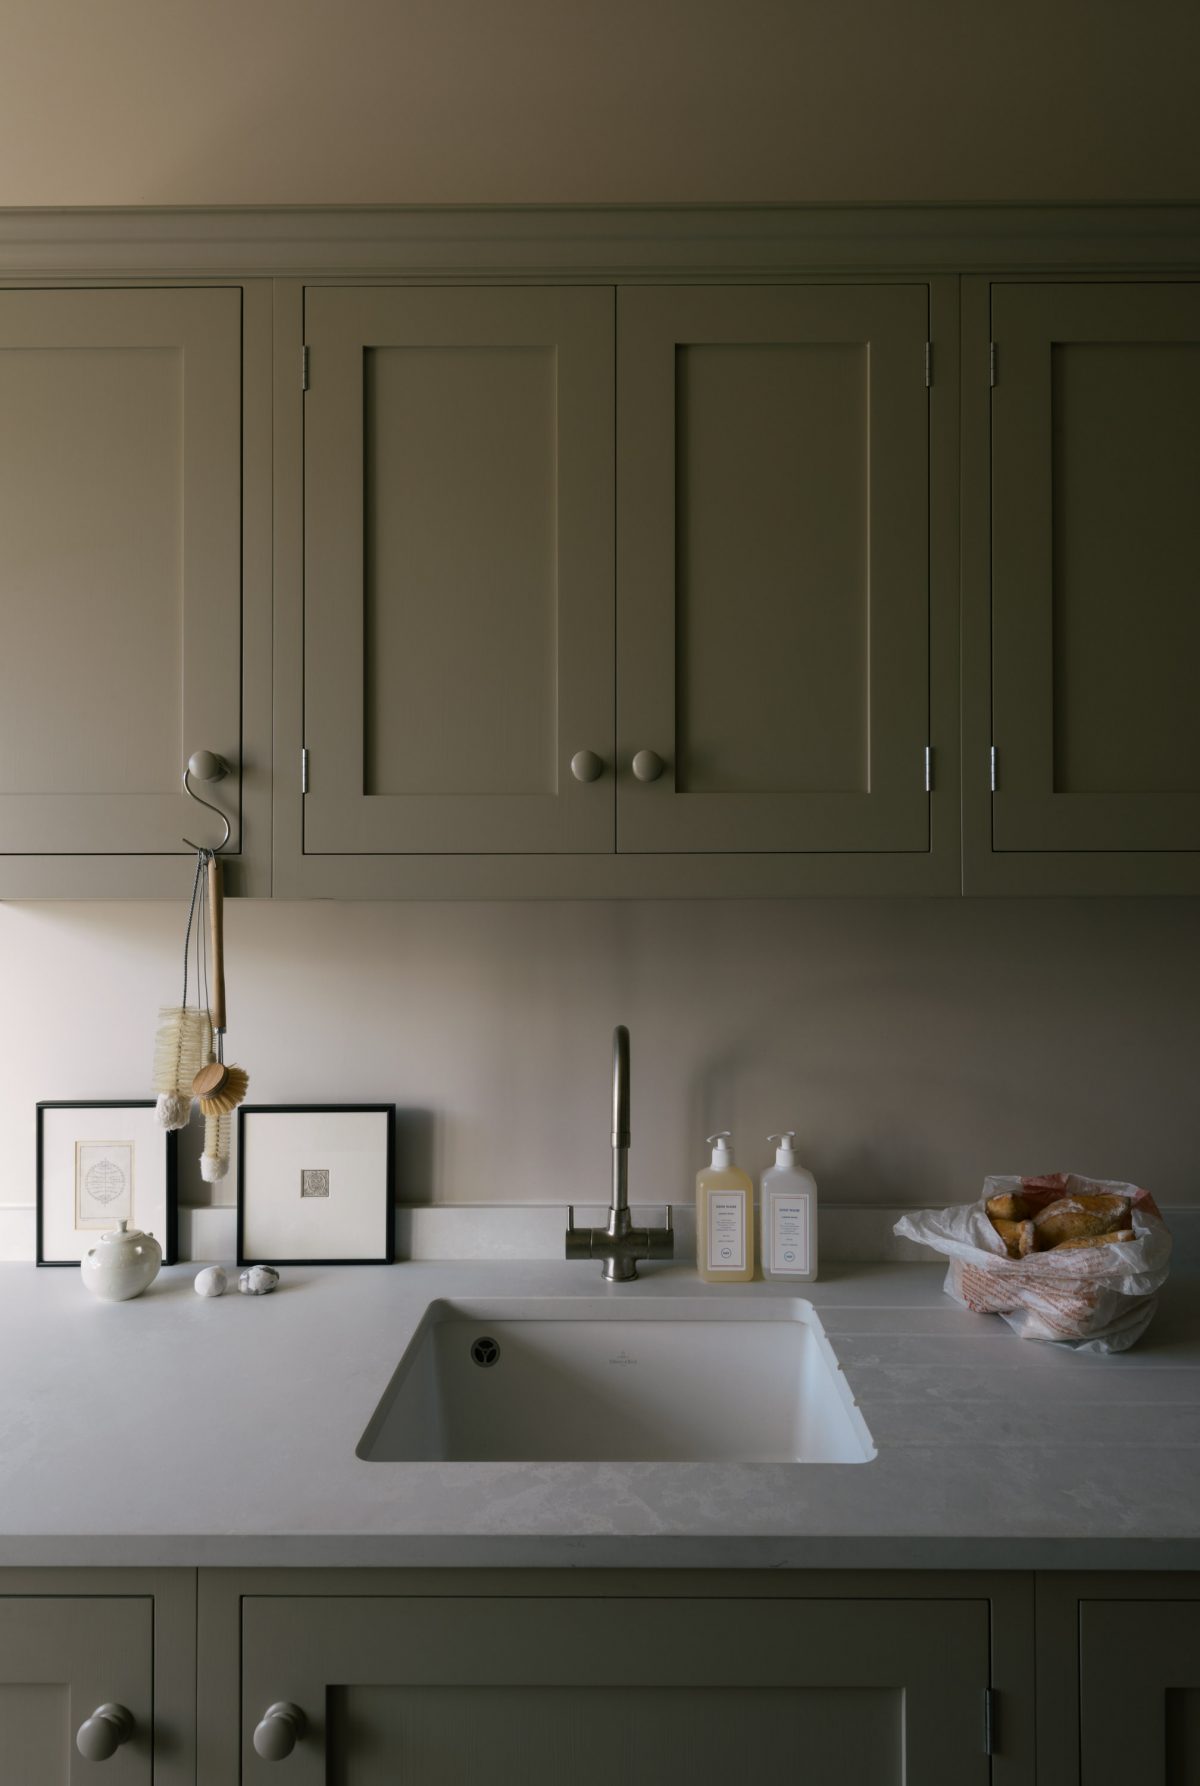 The Bath Kitchen features a manmade surface by Caesarstone, it looks pale, sleek and will take a great deal of use. 